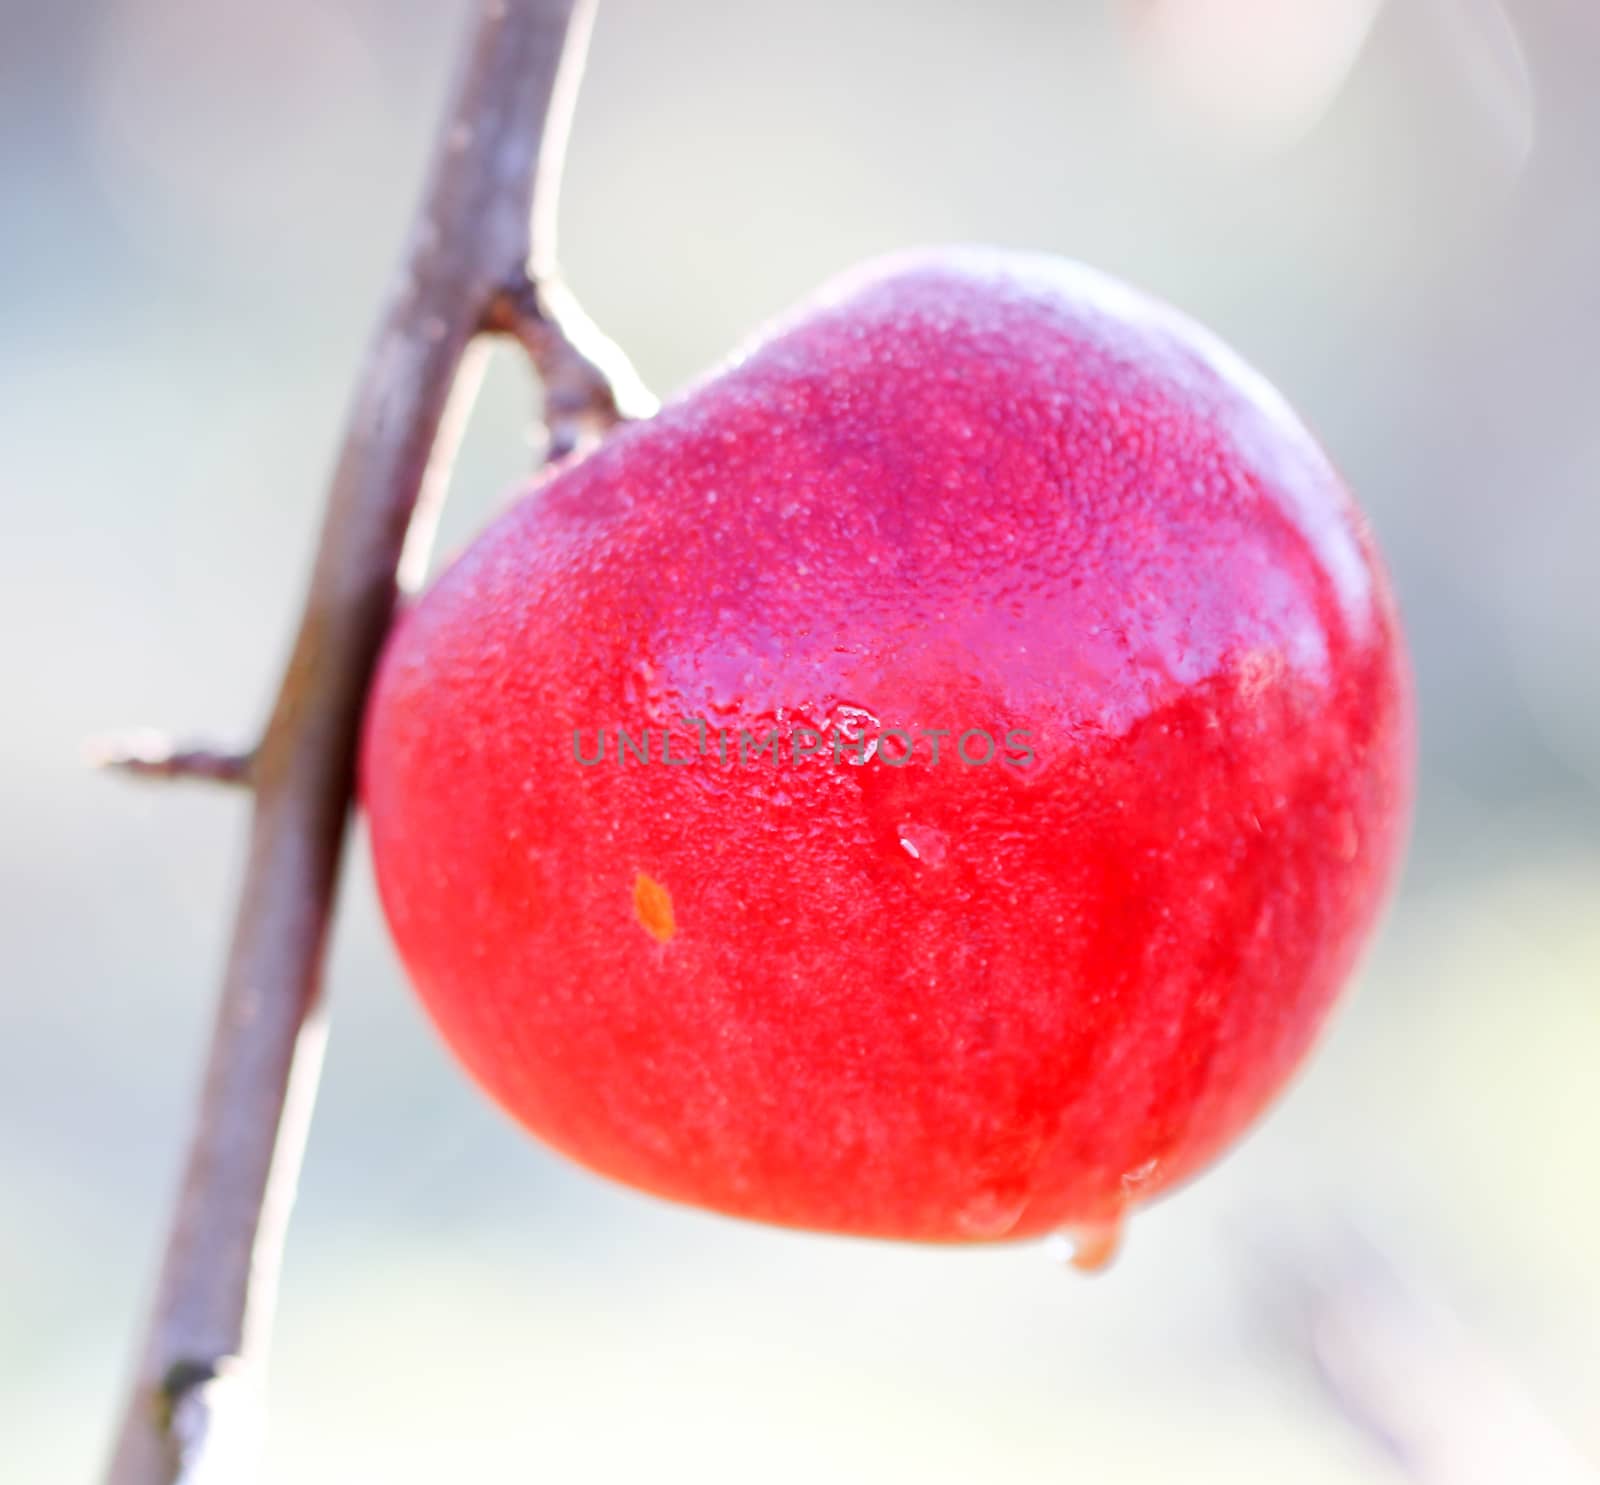 picture of a Apples on tree on november morning,forgotten in harvest